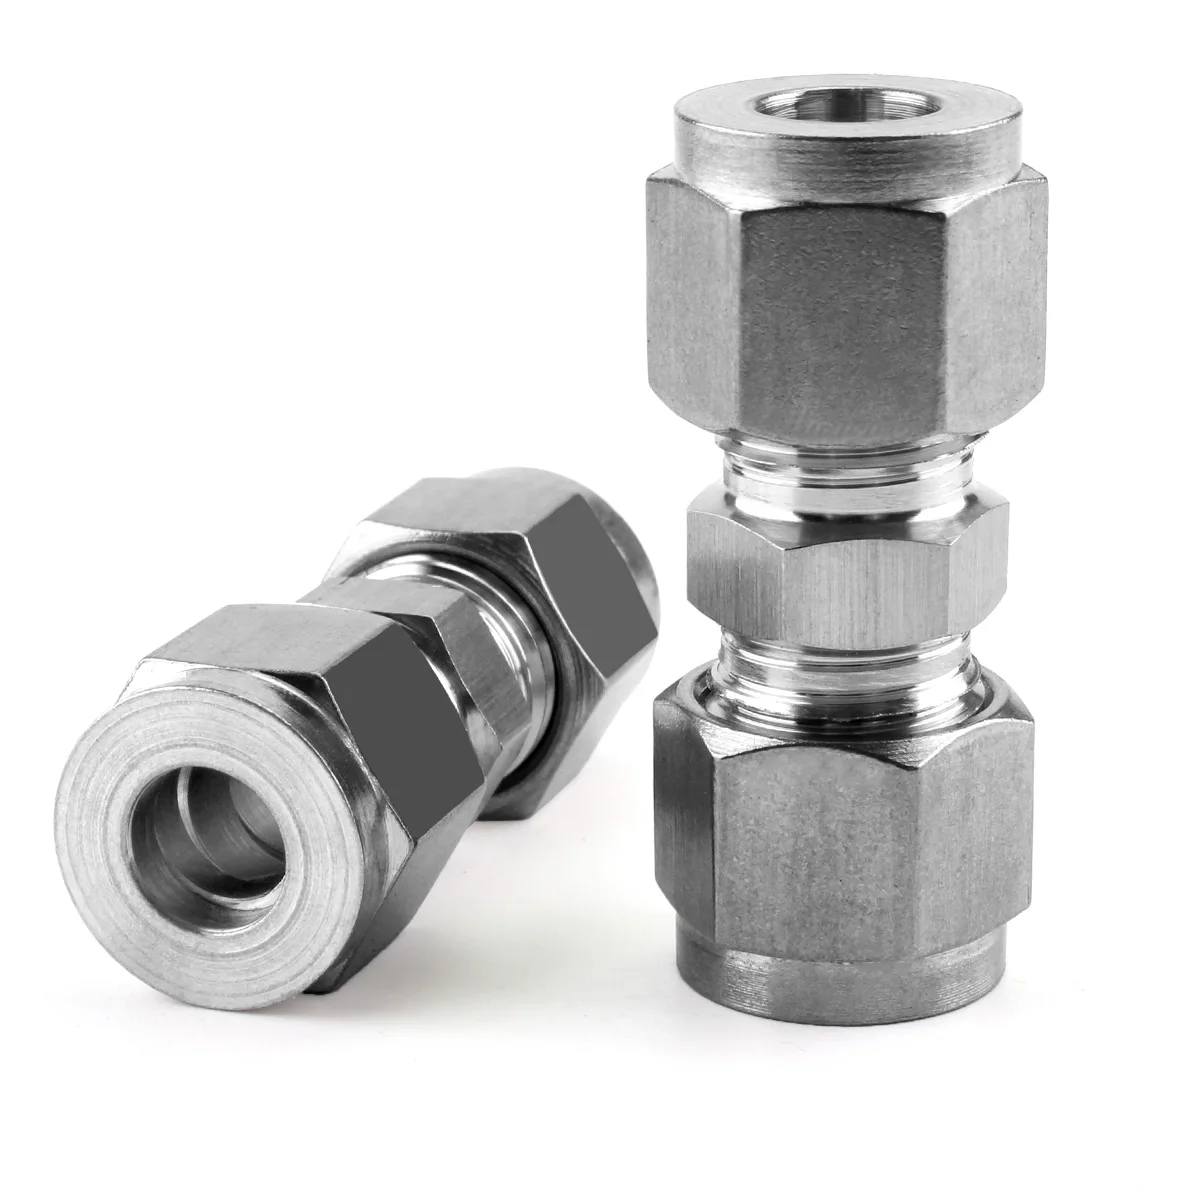 

304 Stainless Steel Straight Double Ferrule Pipe Thread Connector 3 4 6 8 10 12 16 20 22 25mm Pneumatic Dashboard Joint Fittings